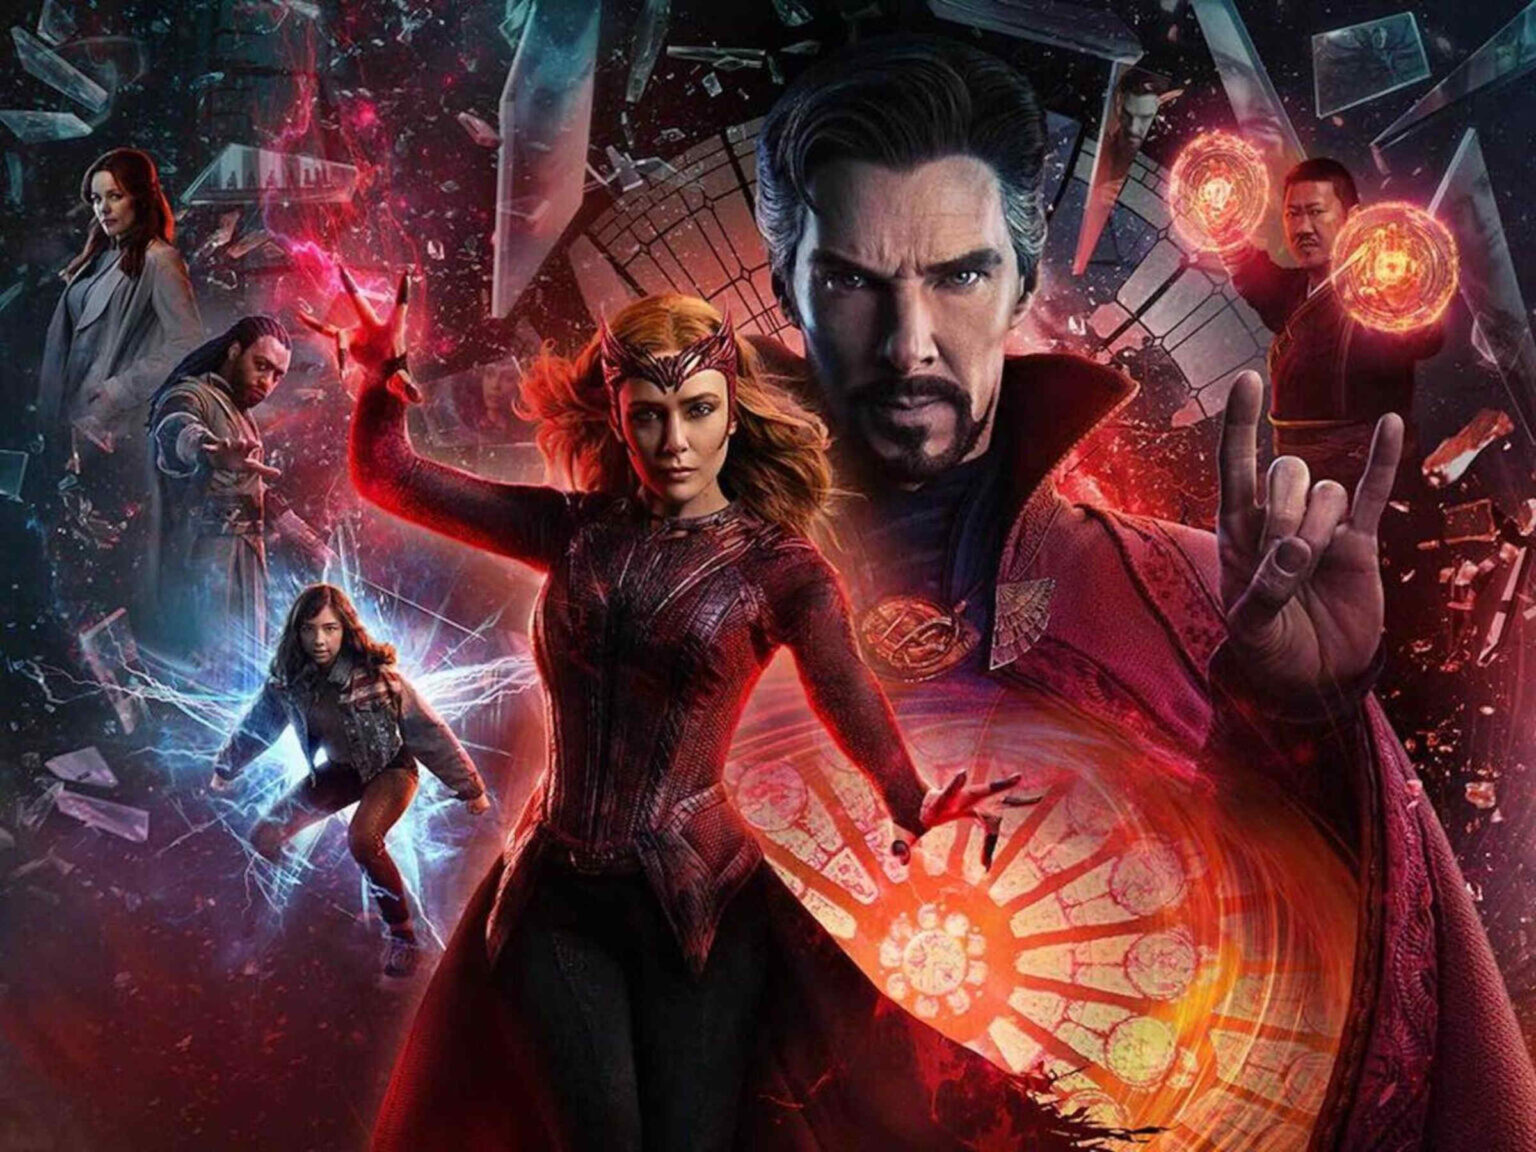 'Doctor Strange 2' is Finally here. Find out how to watch Doctor Strange in the Multiverse of Madness online for free.